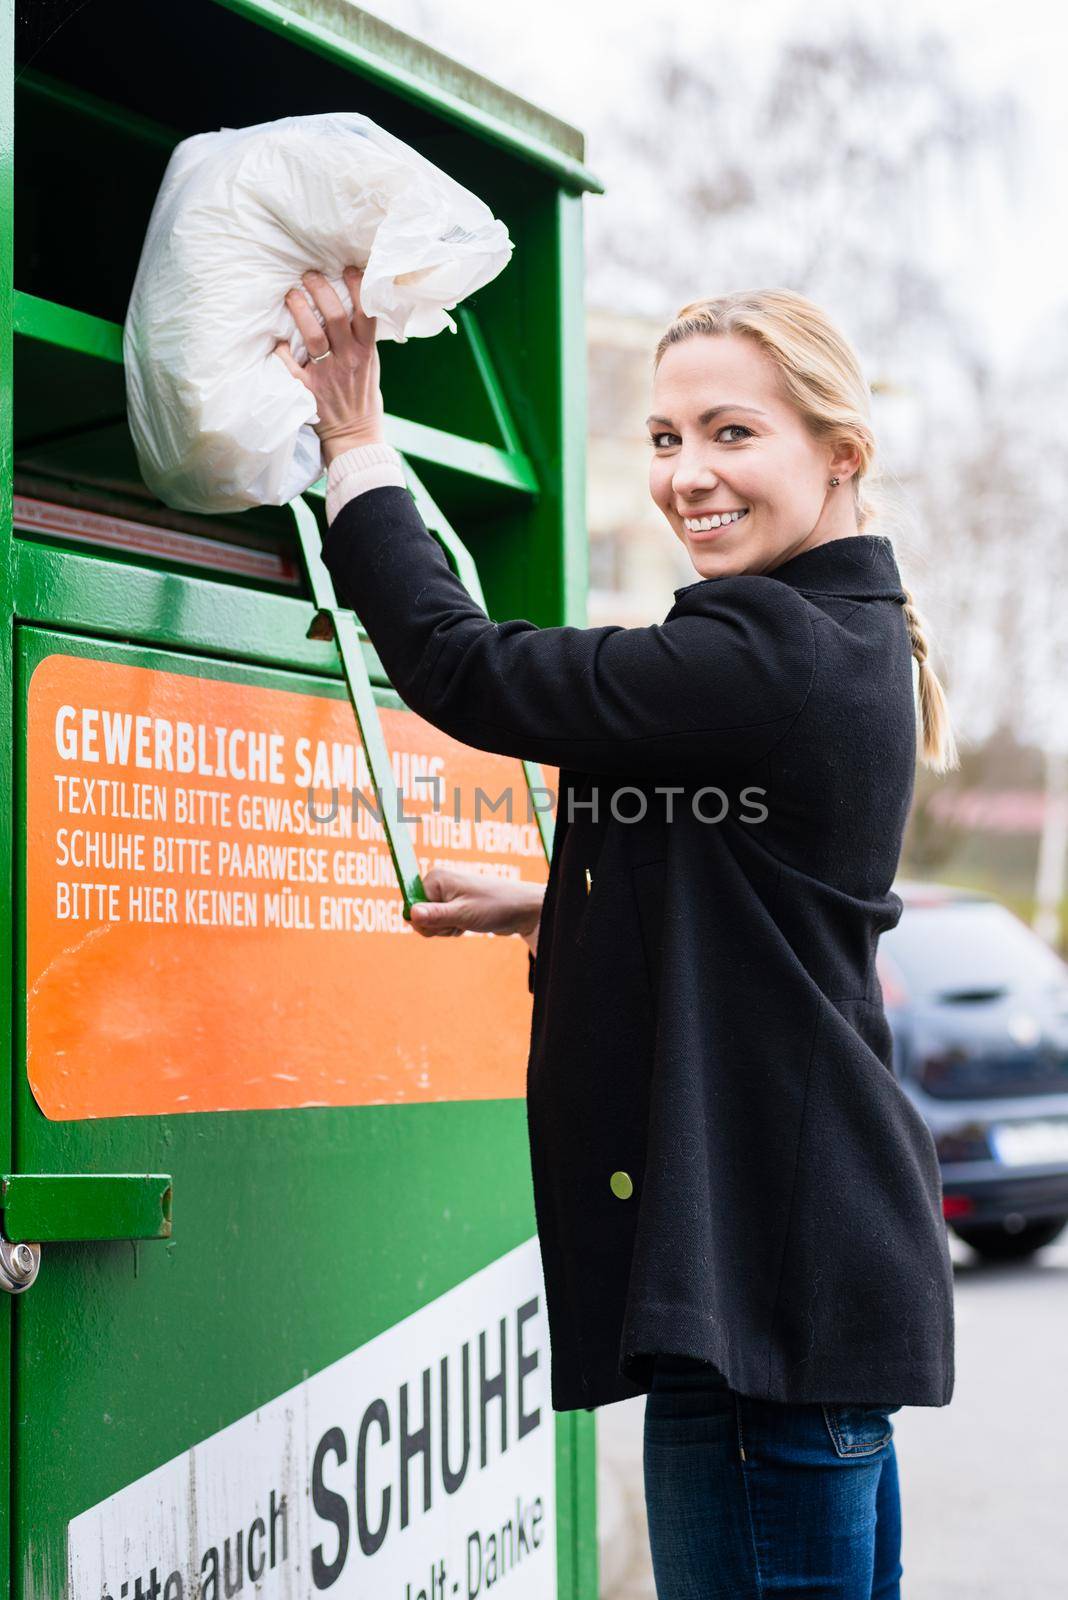 Woman putting old or used clothes into donation bin by Kzenon